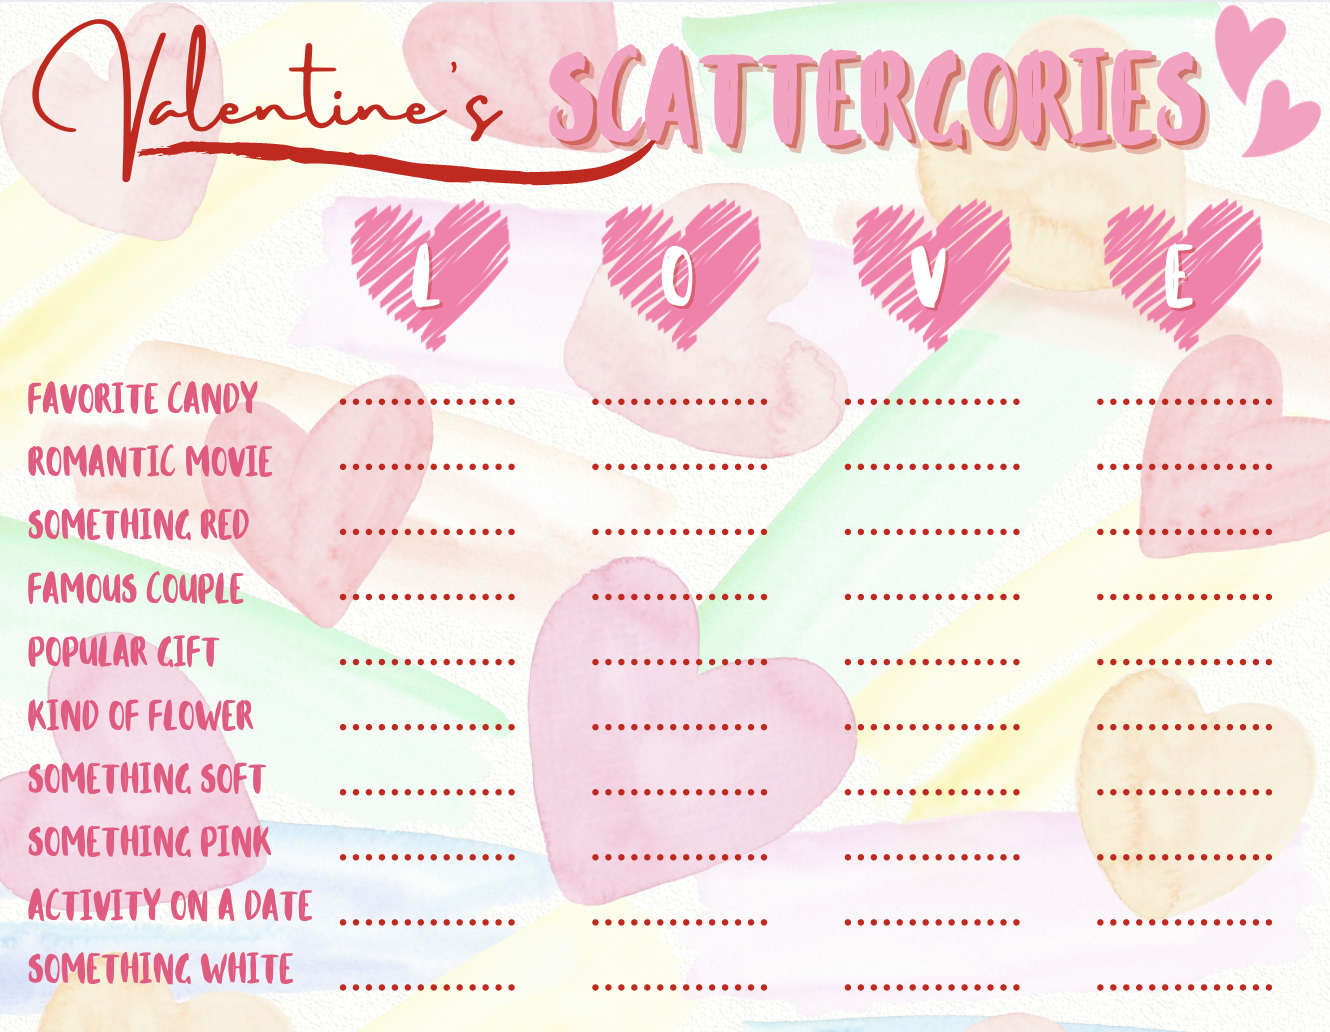 Valentine's Scattergories Fill-in-the-Blank Game {Free Printable}